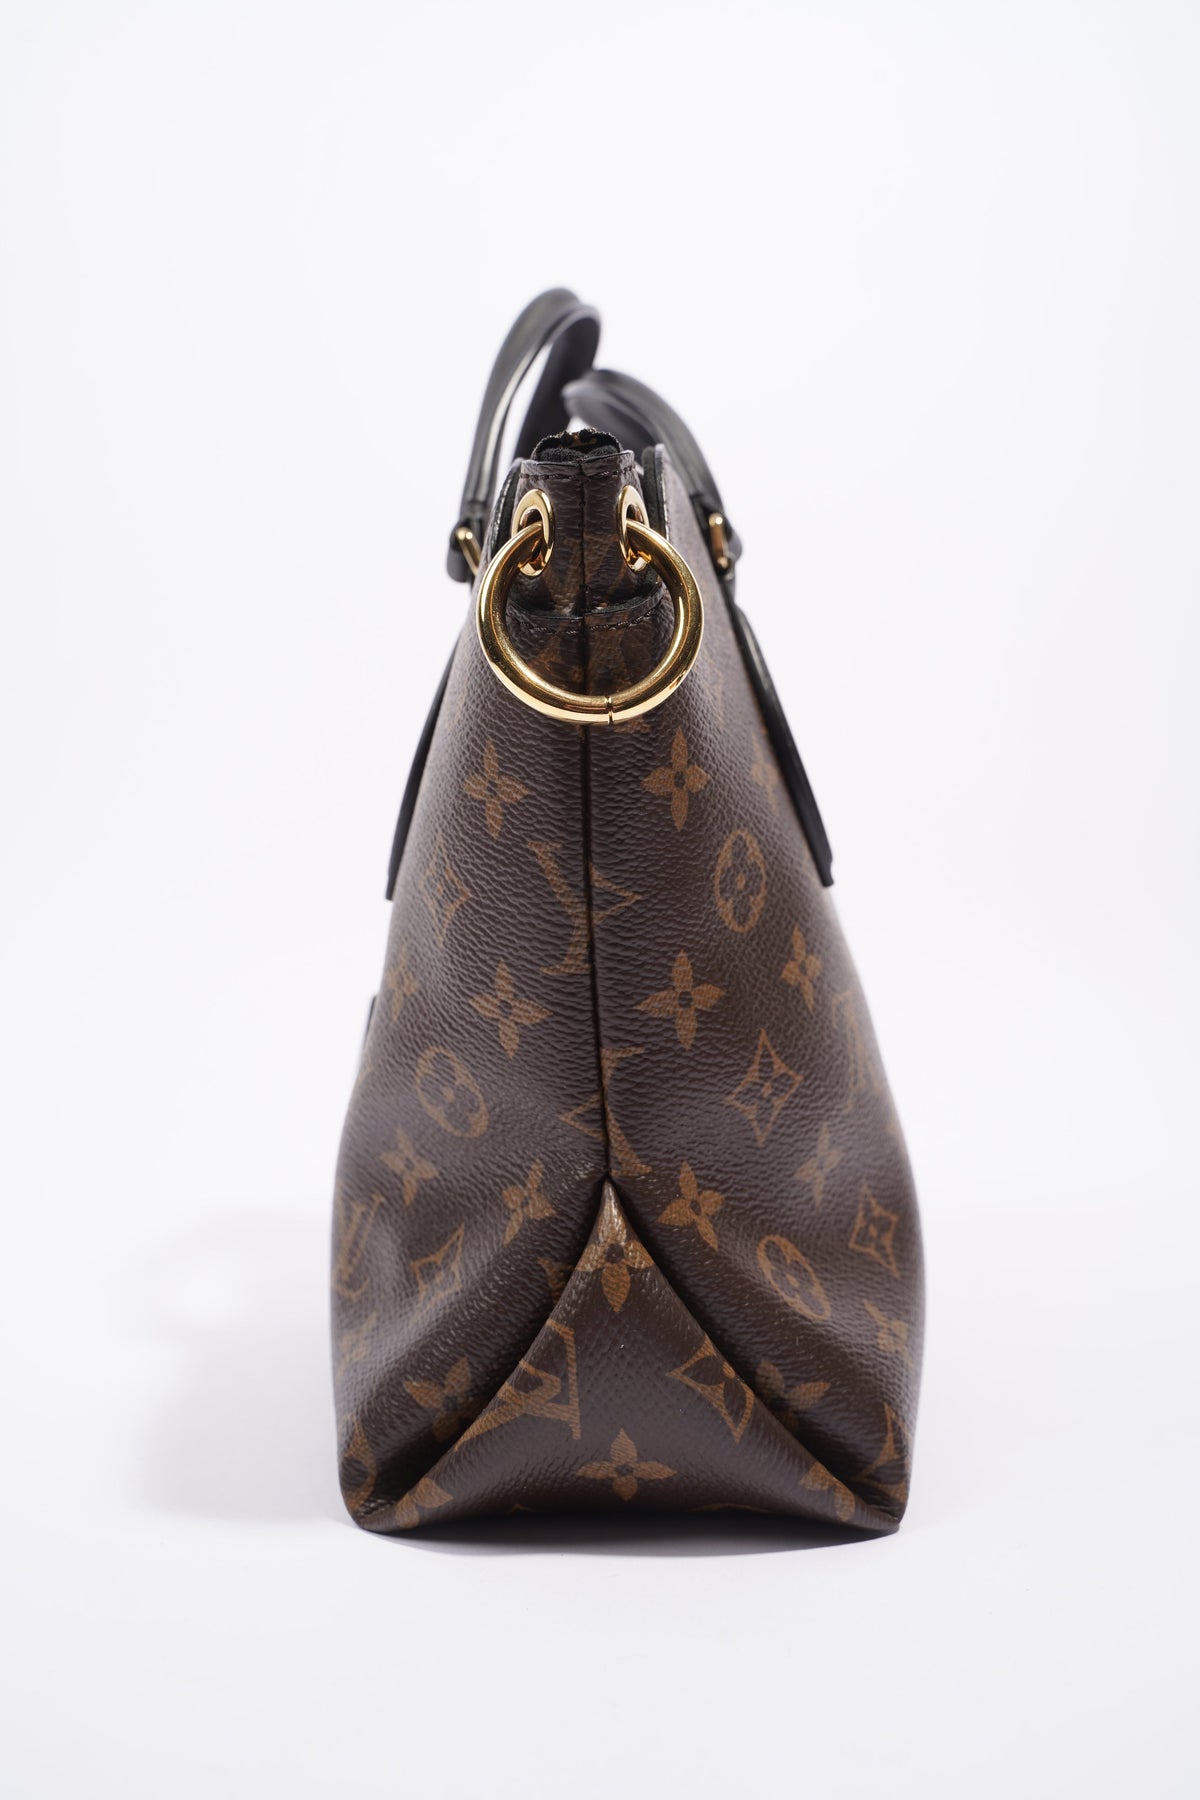 Louis Vuitton Flower Zipped Tote Pm Reviewed